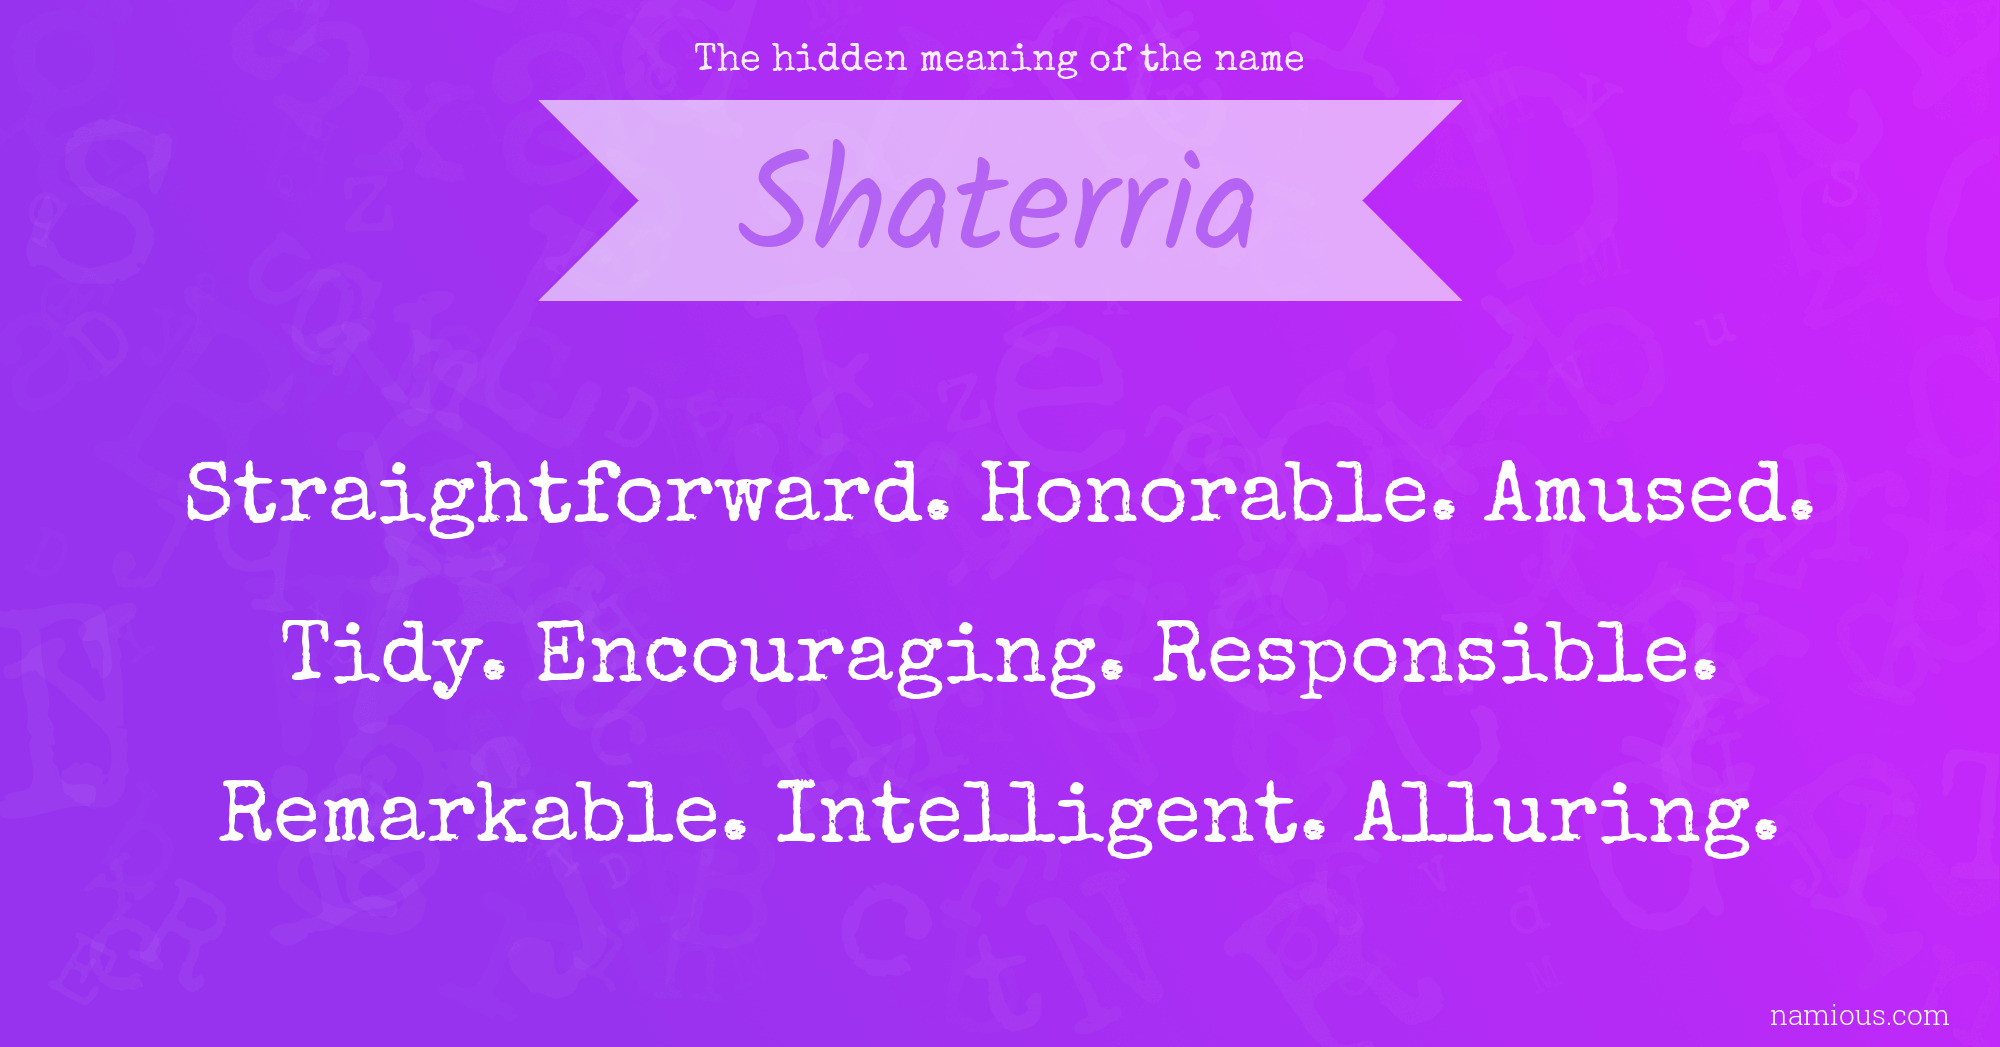 The hidden meaning of the name Shaterria